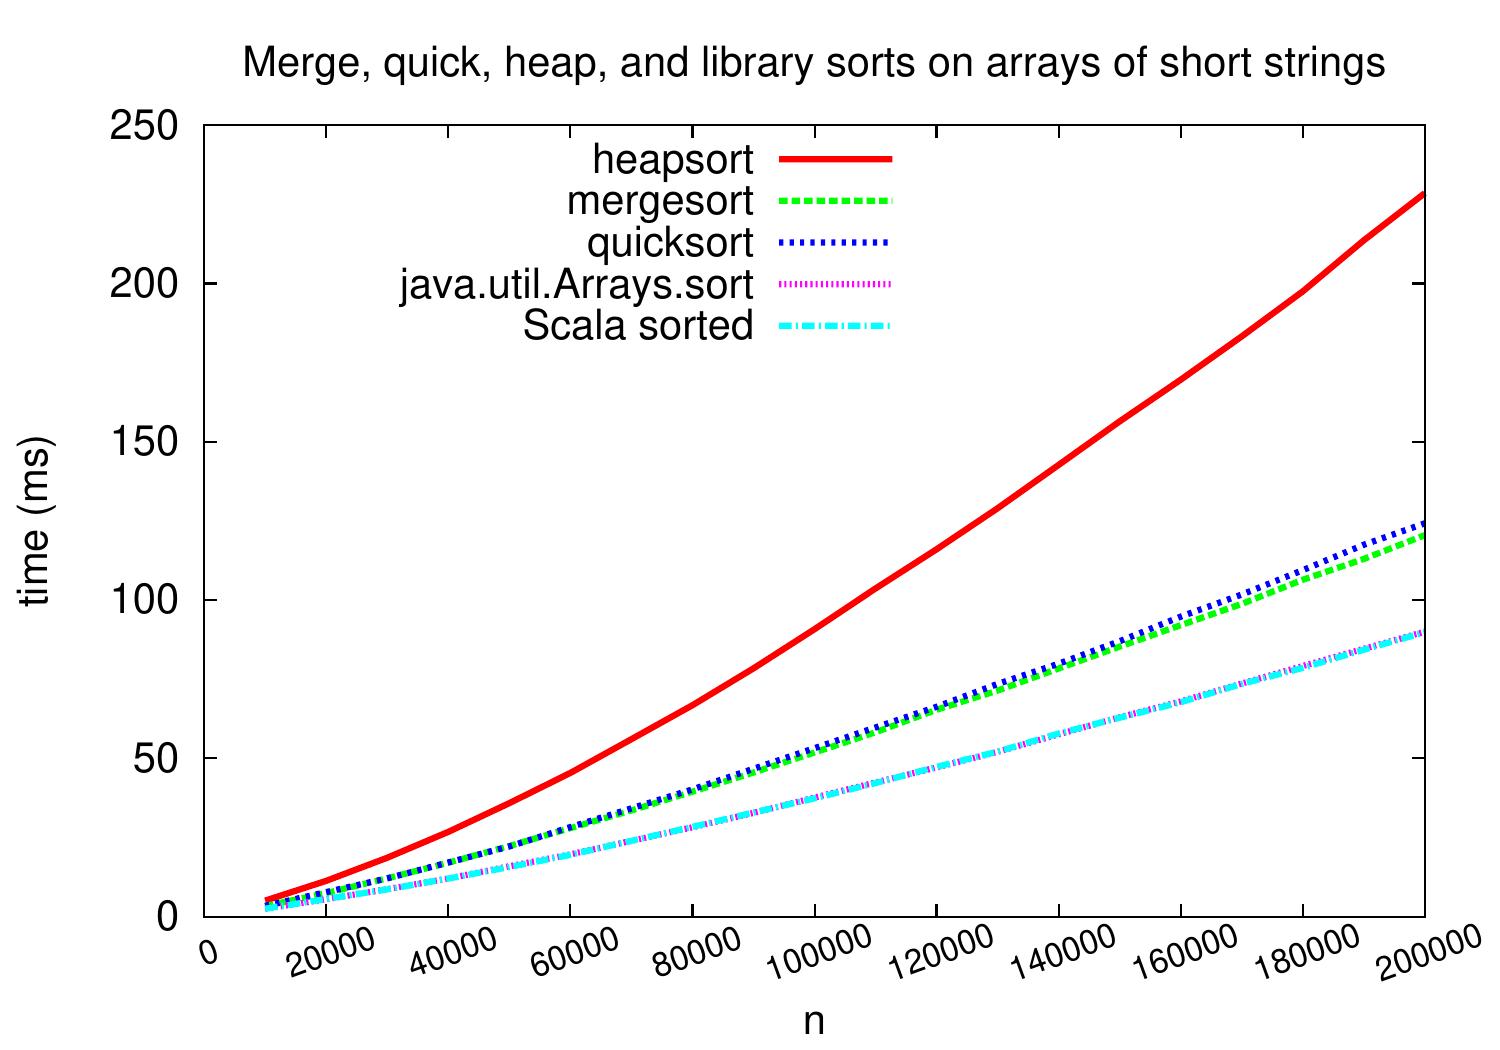 _images/benchmark-merge-quick-heap-library-strings.jpg